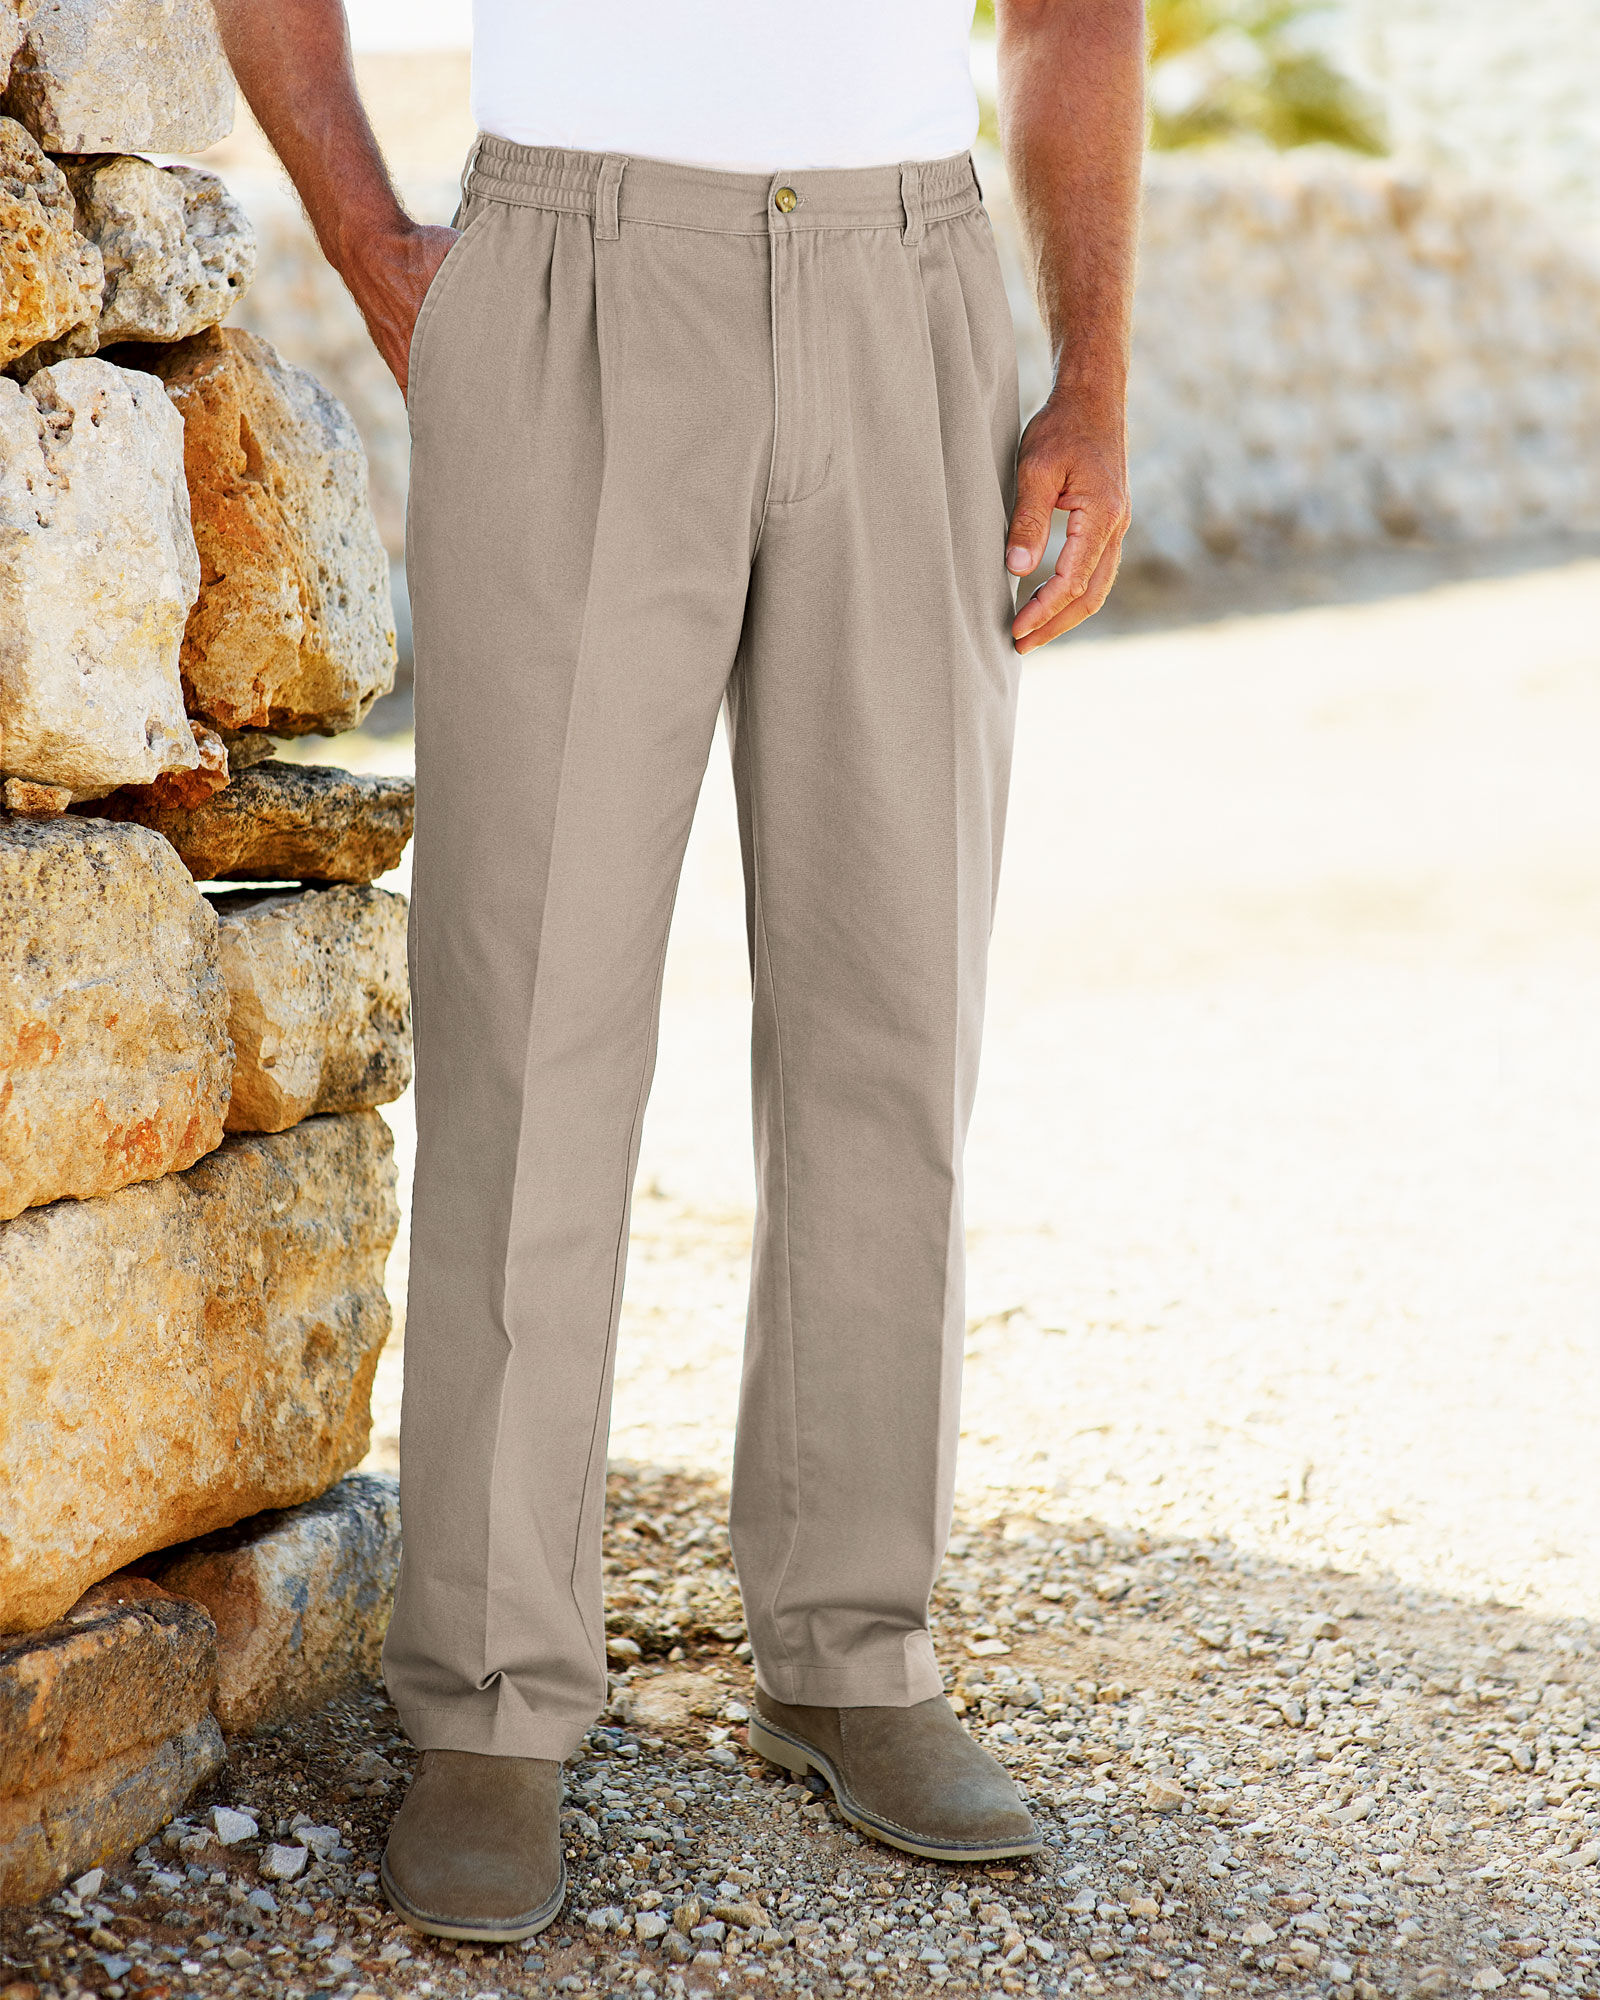 Slim Fit Elasticated Waist Cargo Trousers